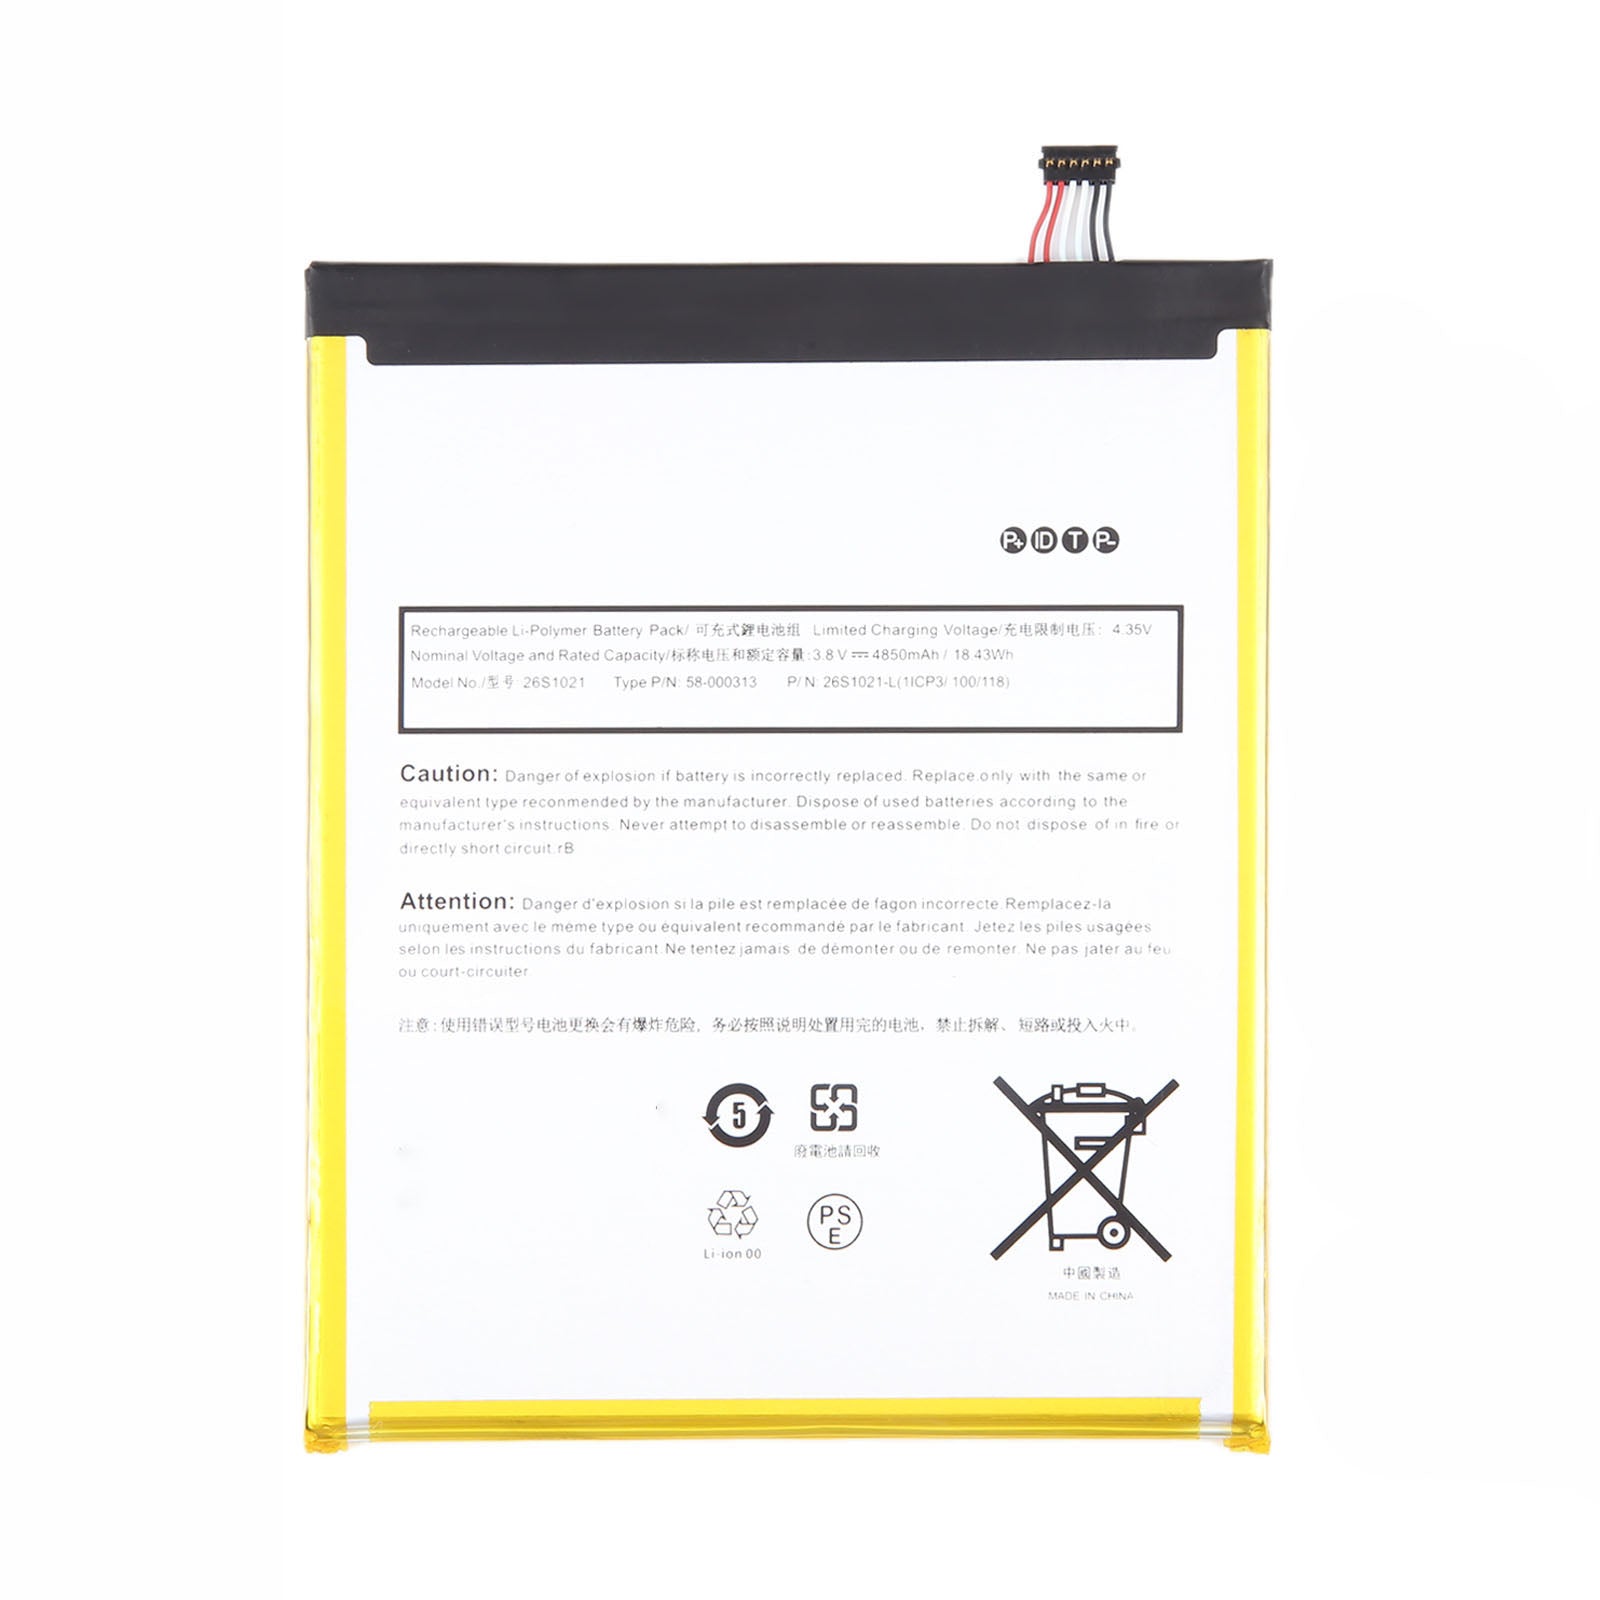 Replacement Battery For Amazon Fire HD 8 10th Gen 2020 - 26S1021